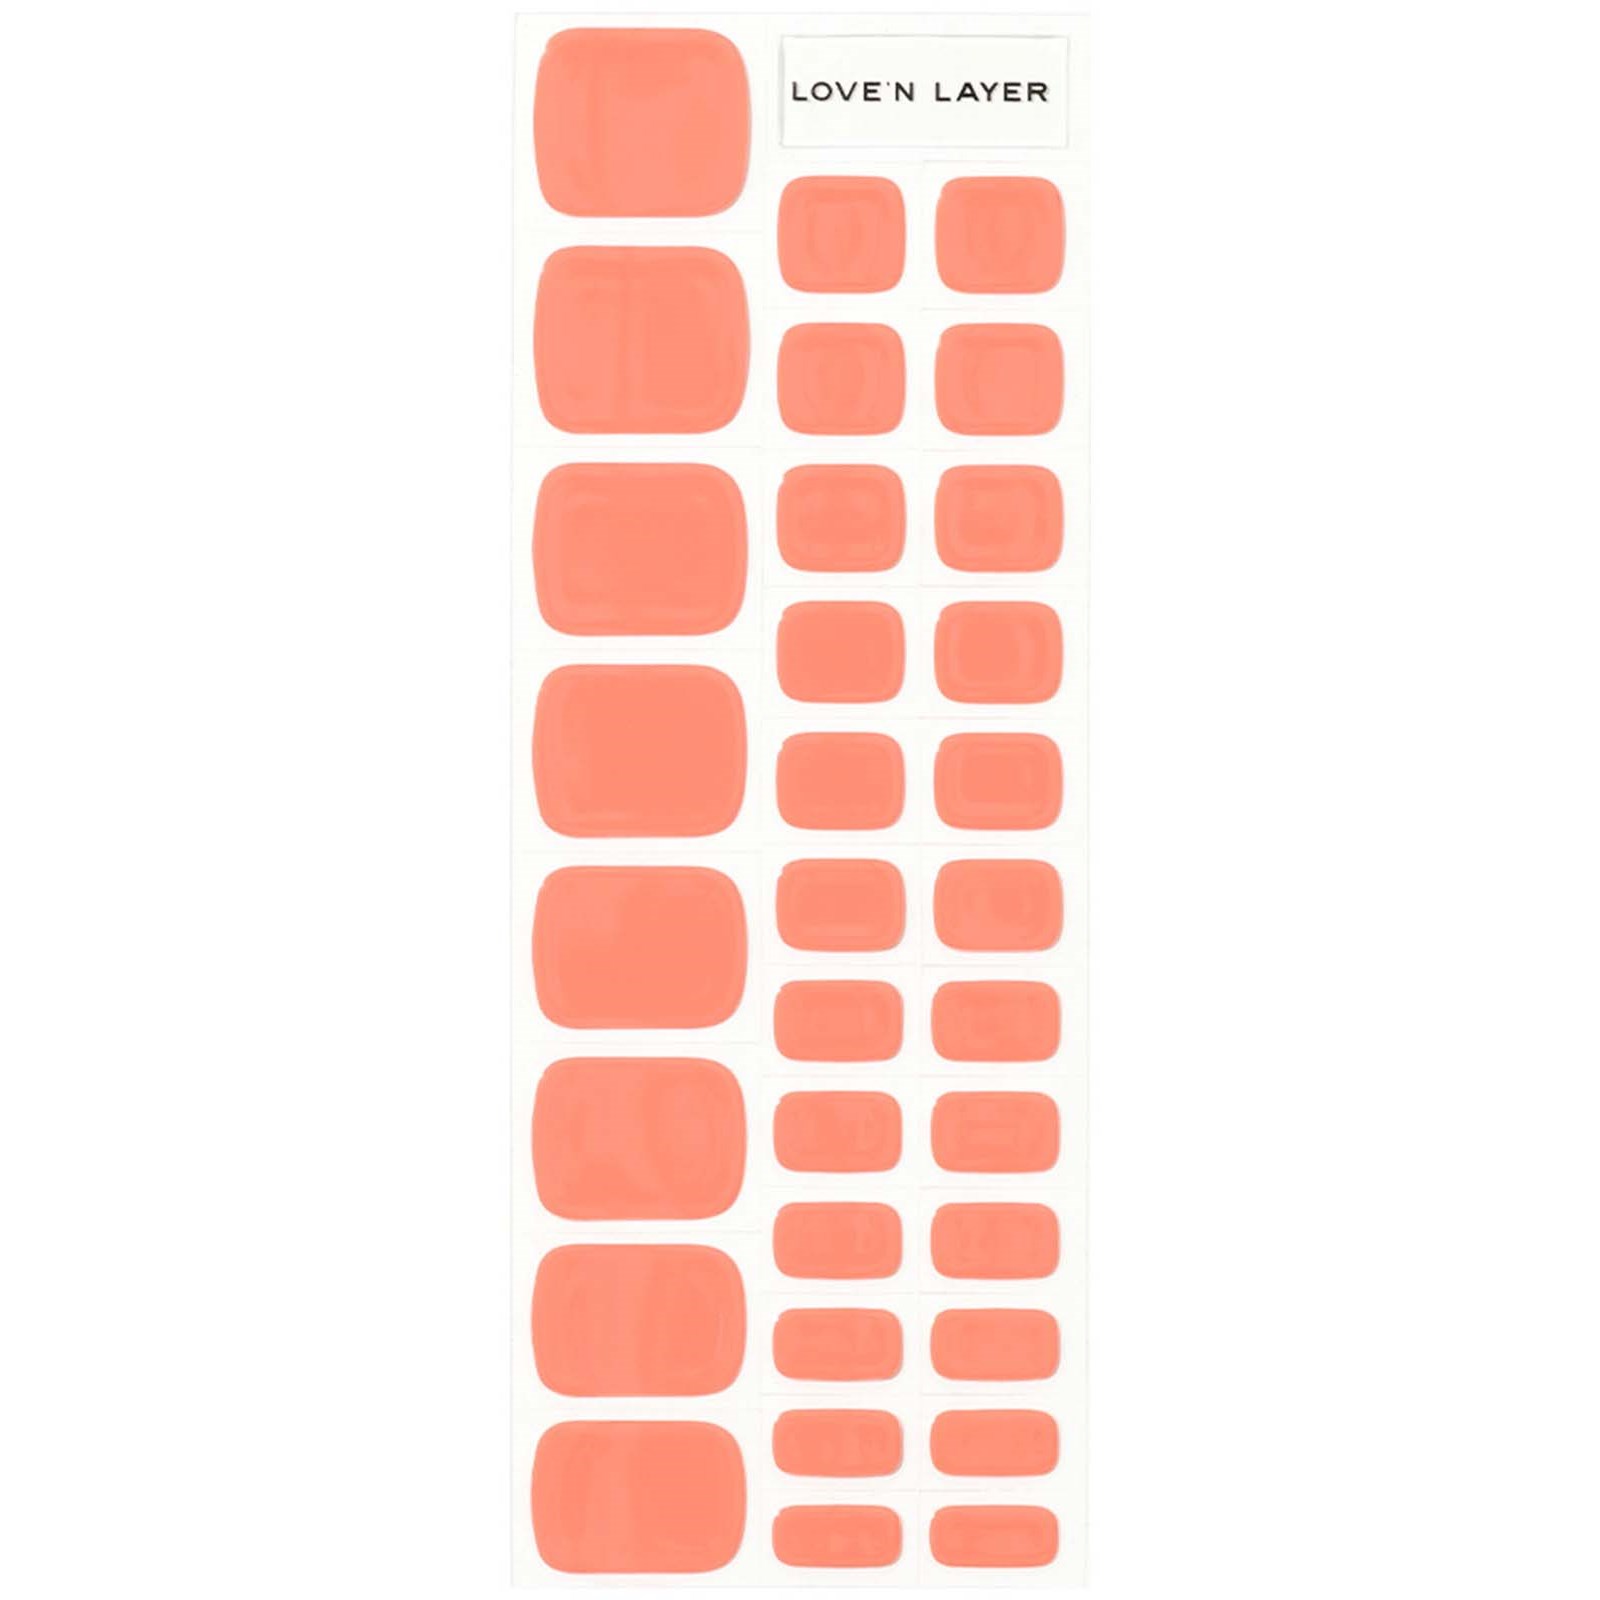 Läs mer om Loven Layer Solid Toe Pale Coral